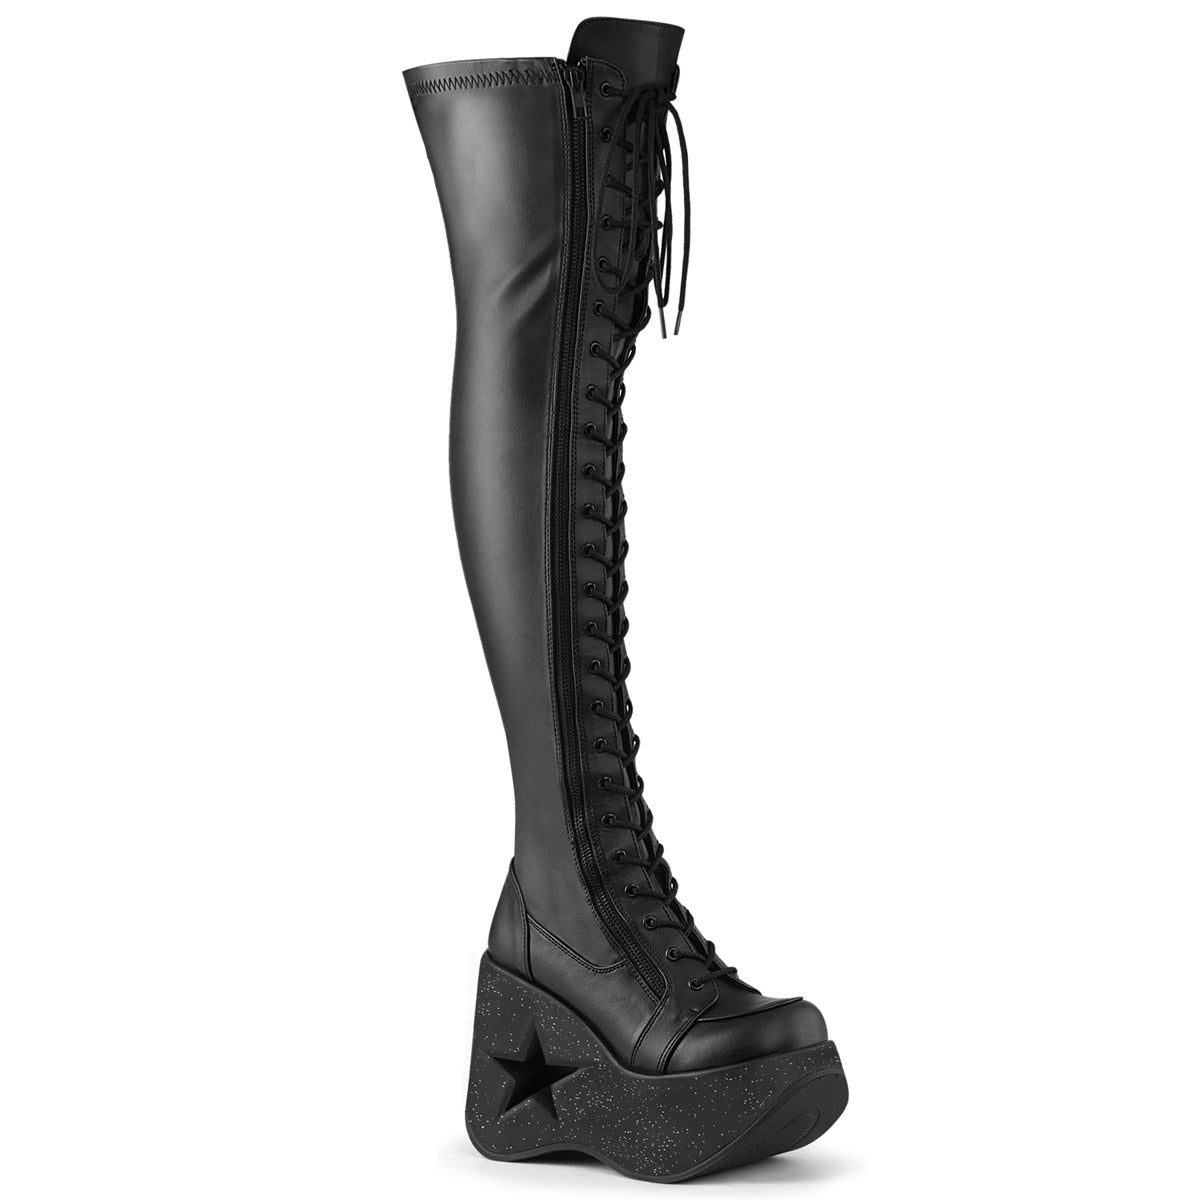 5" Wedge Thigh High Wedge Cut out Star Boots